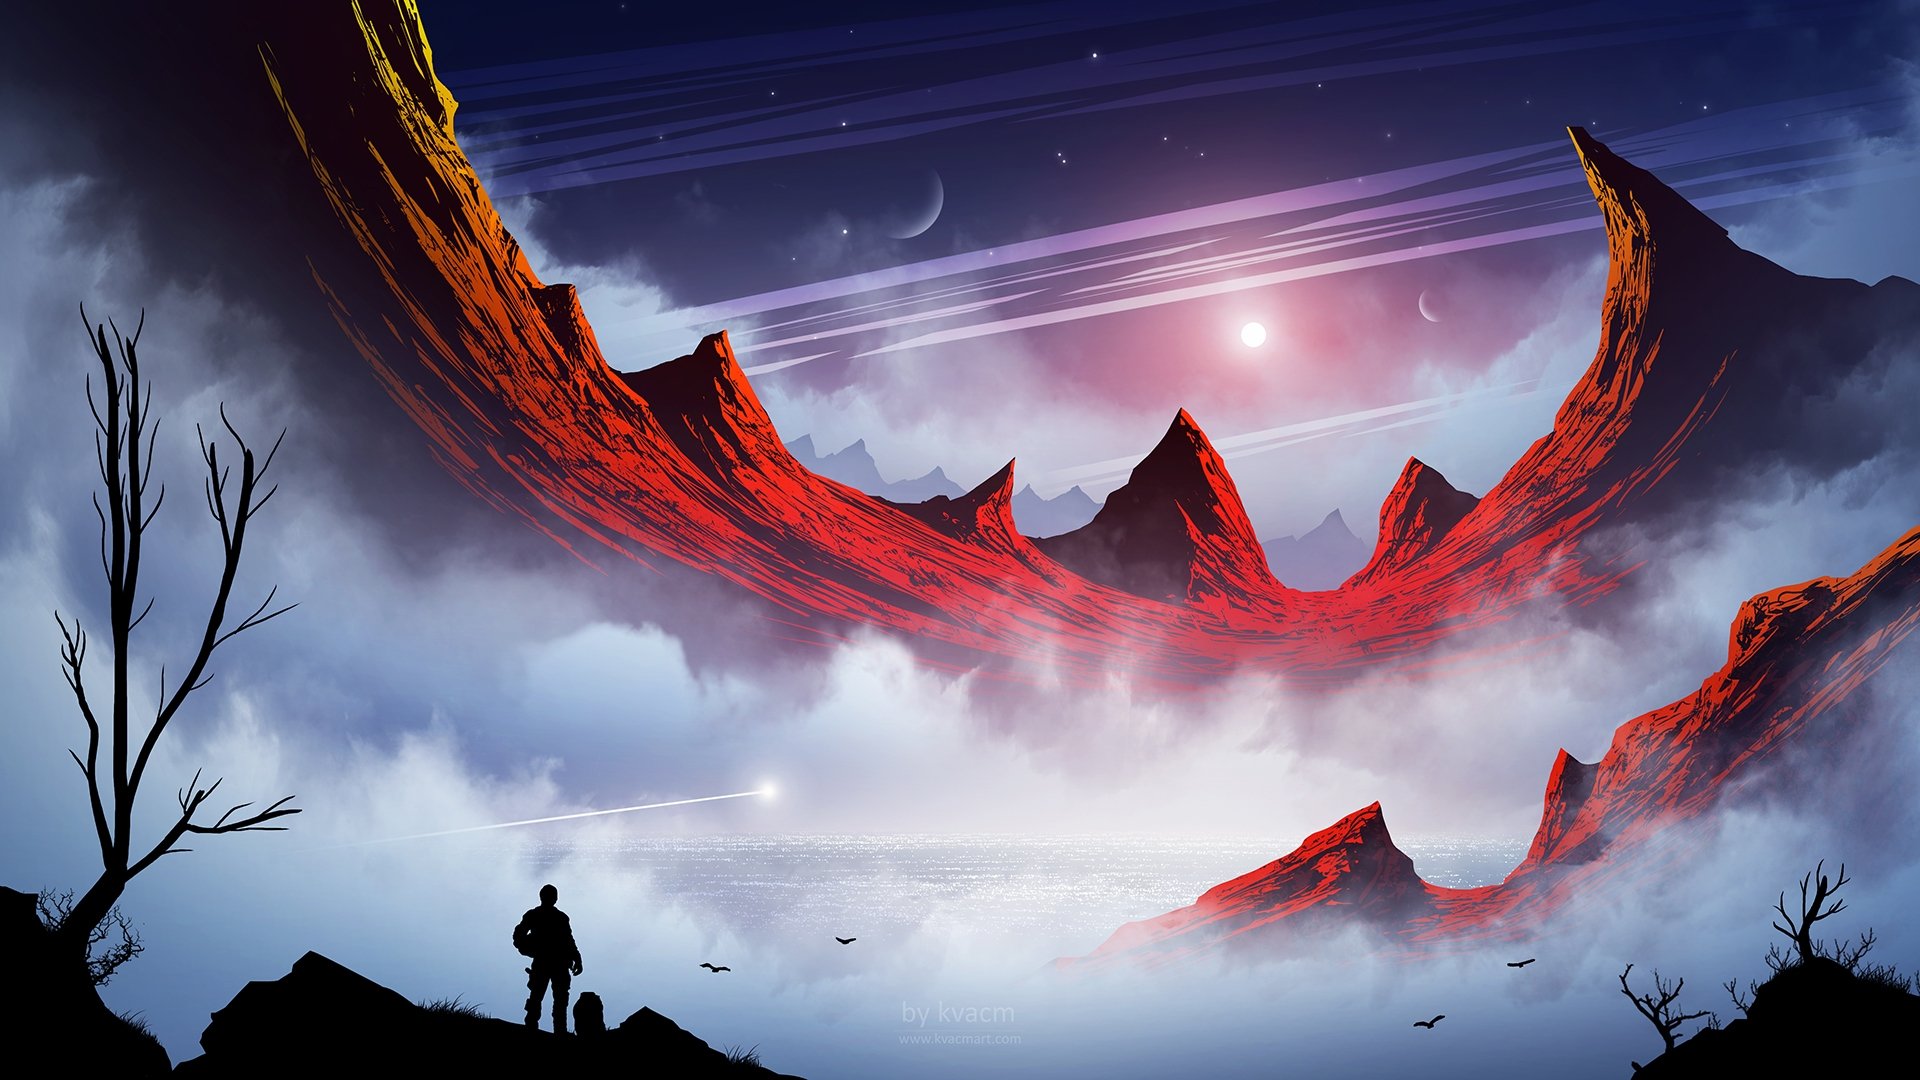 Download 1920x1080 Fantasy Landscape, Mountains, Man, Planets, Sci Fi Wallpaper For Widescreen